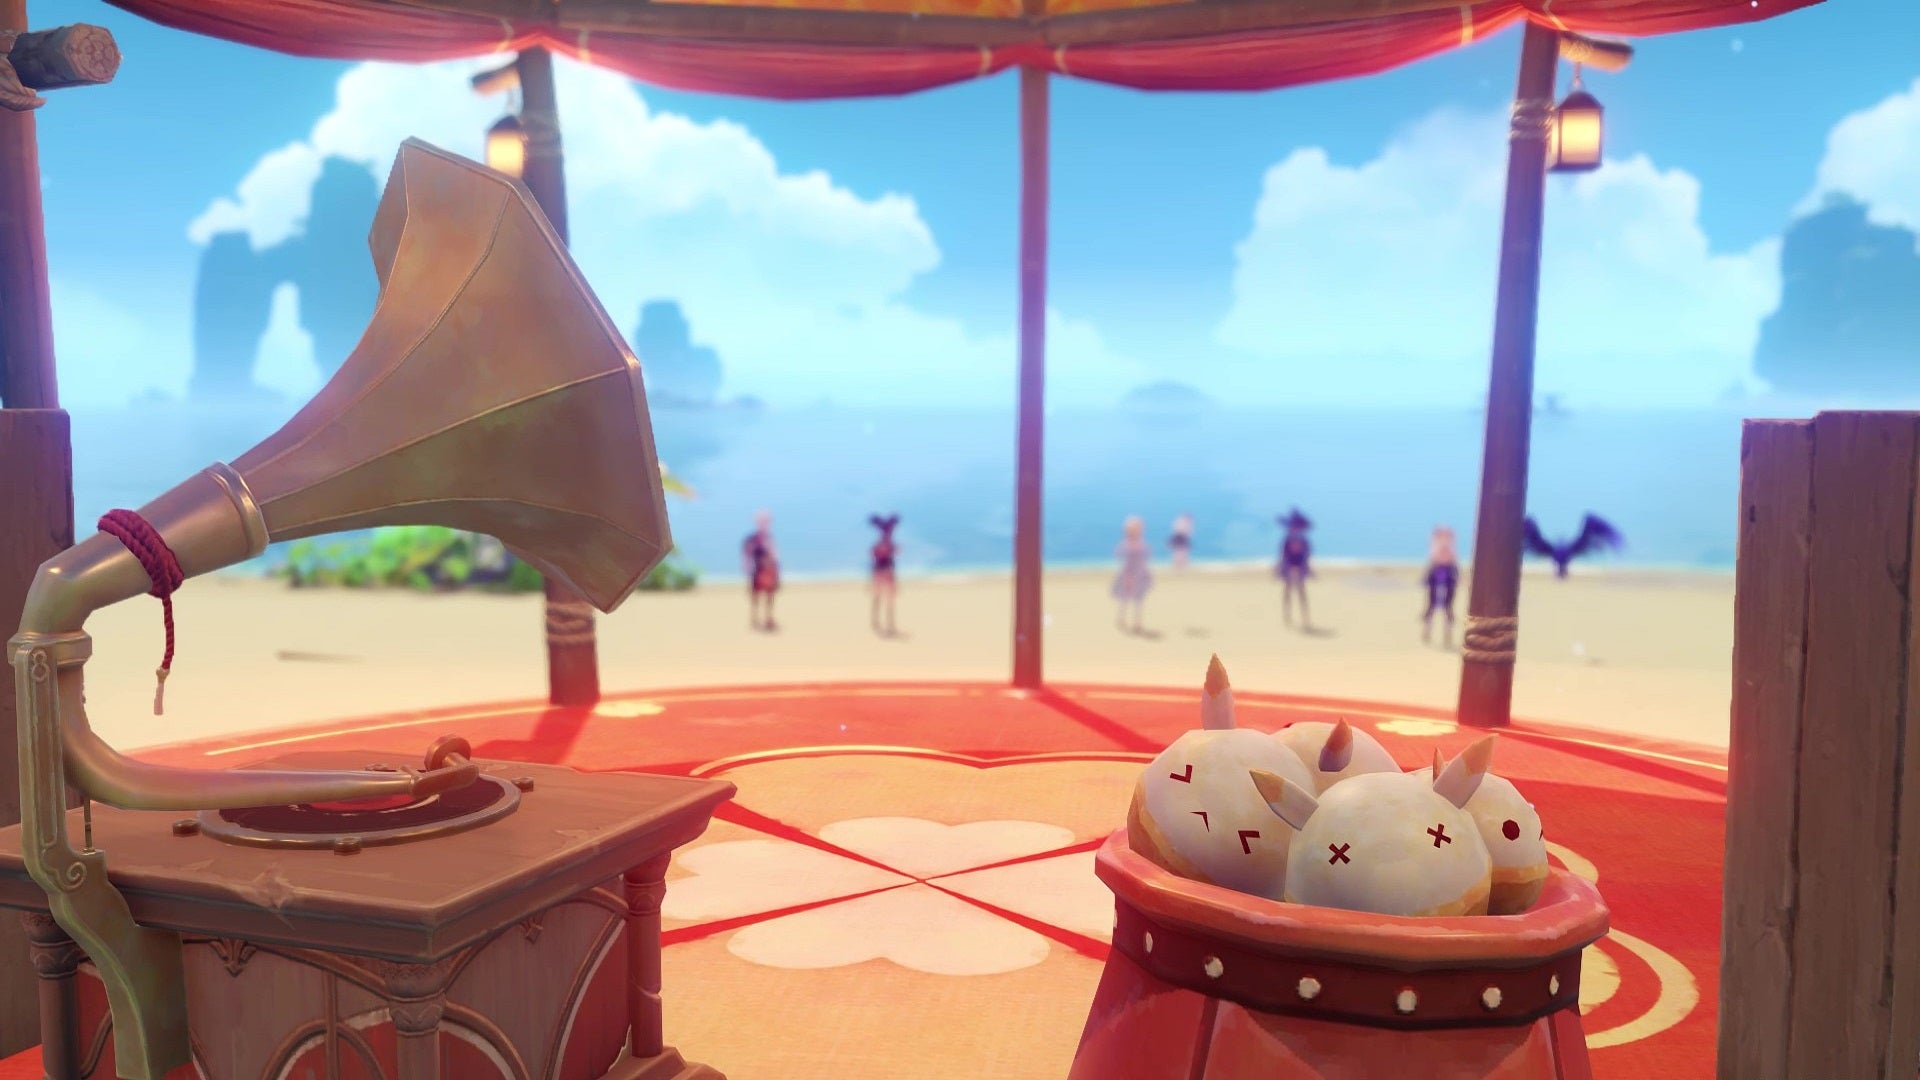 A cutscene still from Genshin Impact's Summertime Odyssey event sets the scene. In the foreground, a gazebo containing a record player and a container of harpastums. In the background are Kazuha, Xinyan, Lumine, Paimon, Mona, Fischl, and Oz, all standing on a beach admiring the sea.